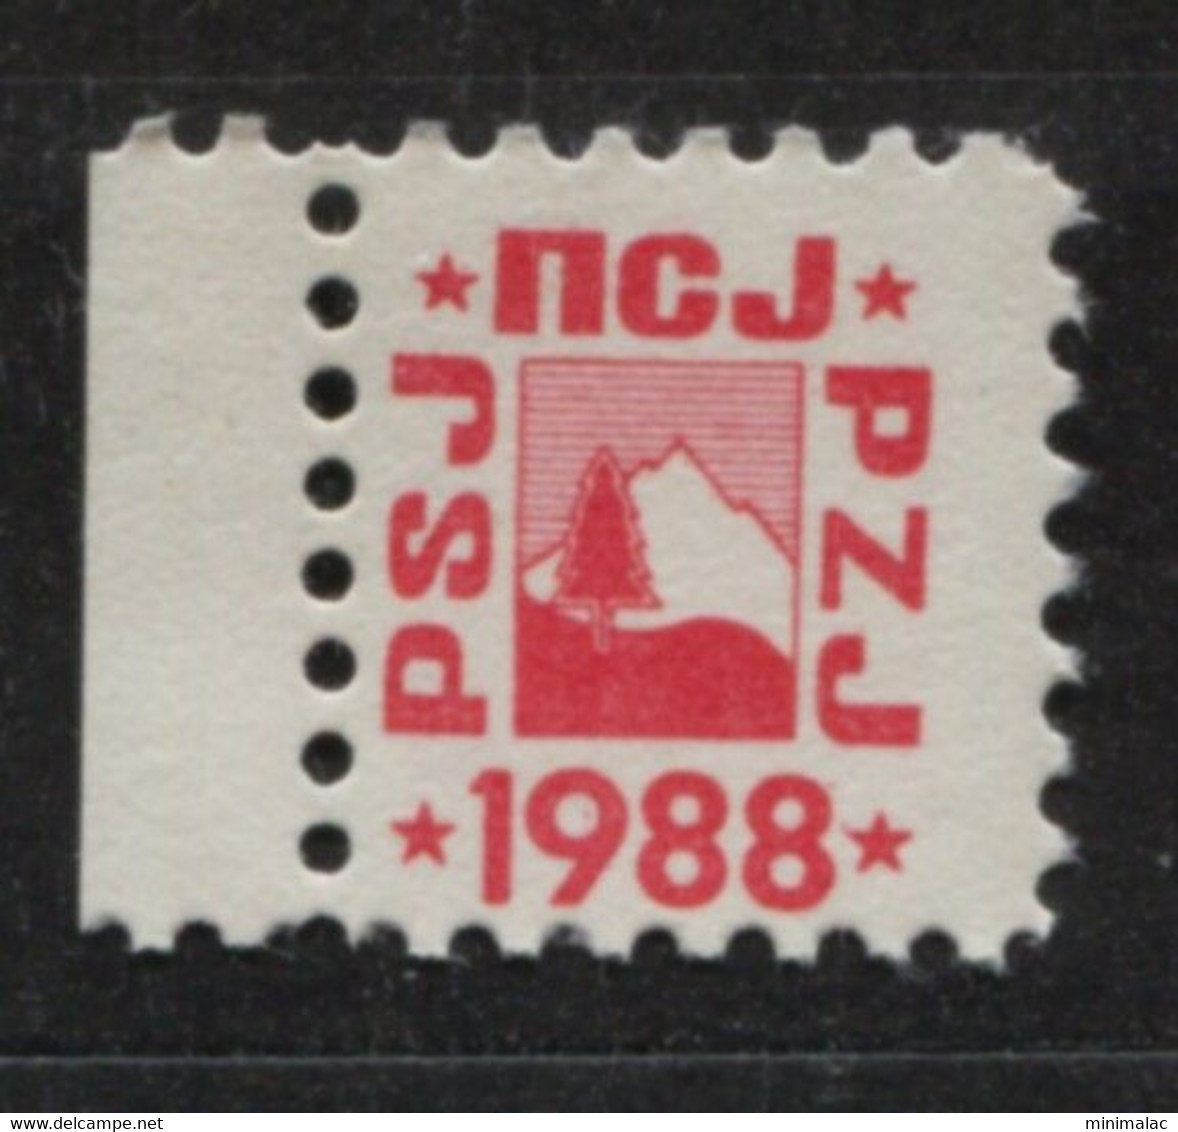 Yugoslavia 1988, Stamp For Membership Mountaineering Association Of Yugoslavia, Revenue, Tax Stamp, Cinderella, Red - Officials